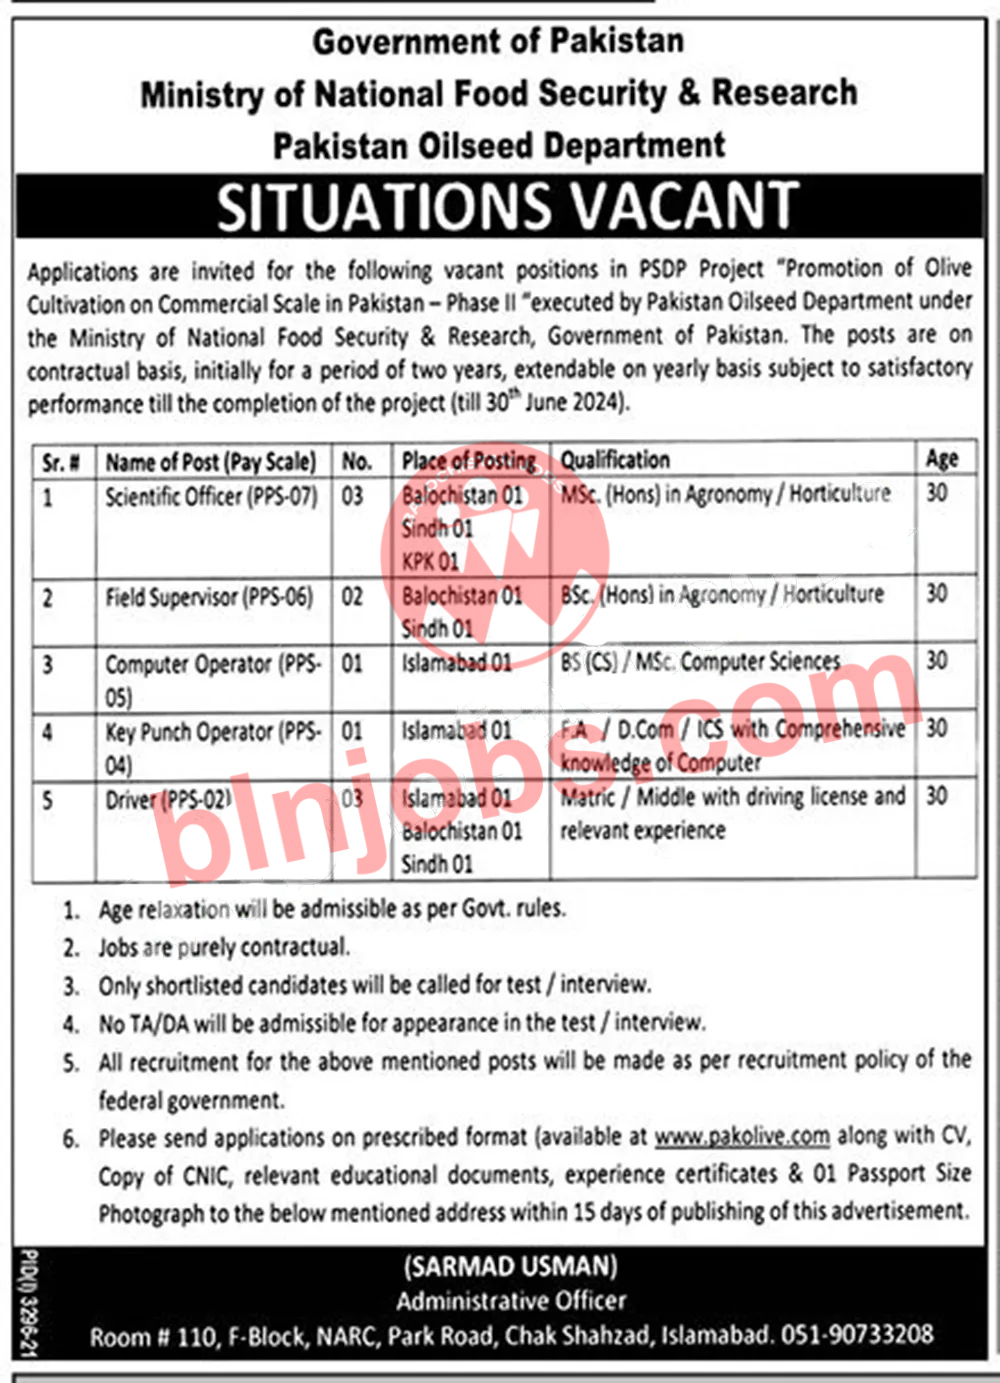 Ministry of National Food Security and Research Jobs 2021 – MNFSR Jobs